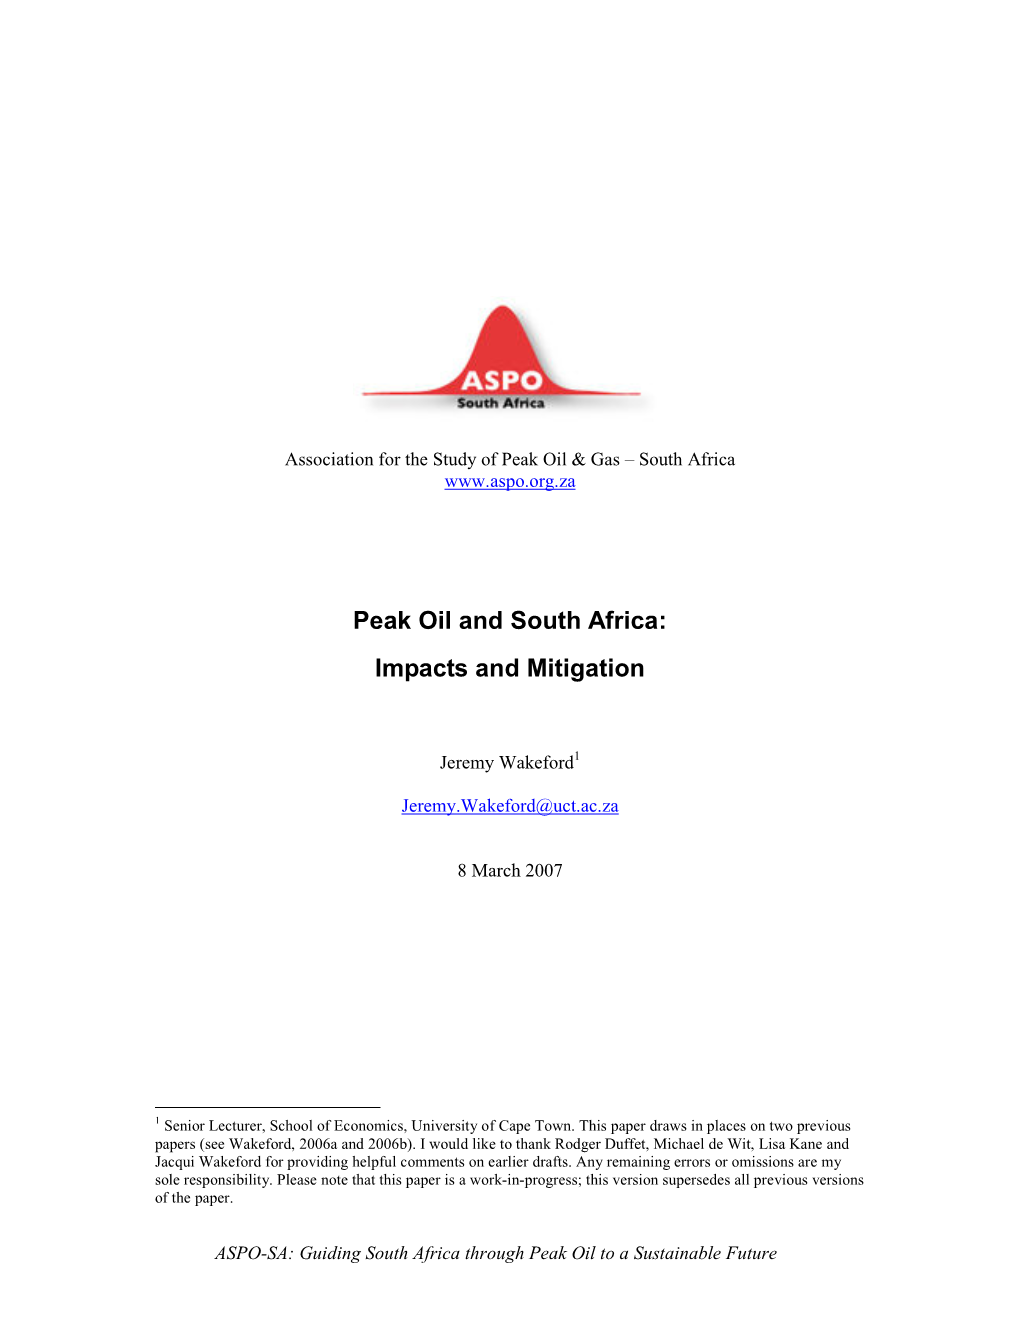 Peak Oil and South Africa: Impacts and Mitigation